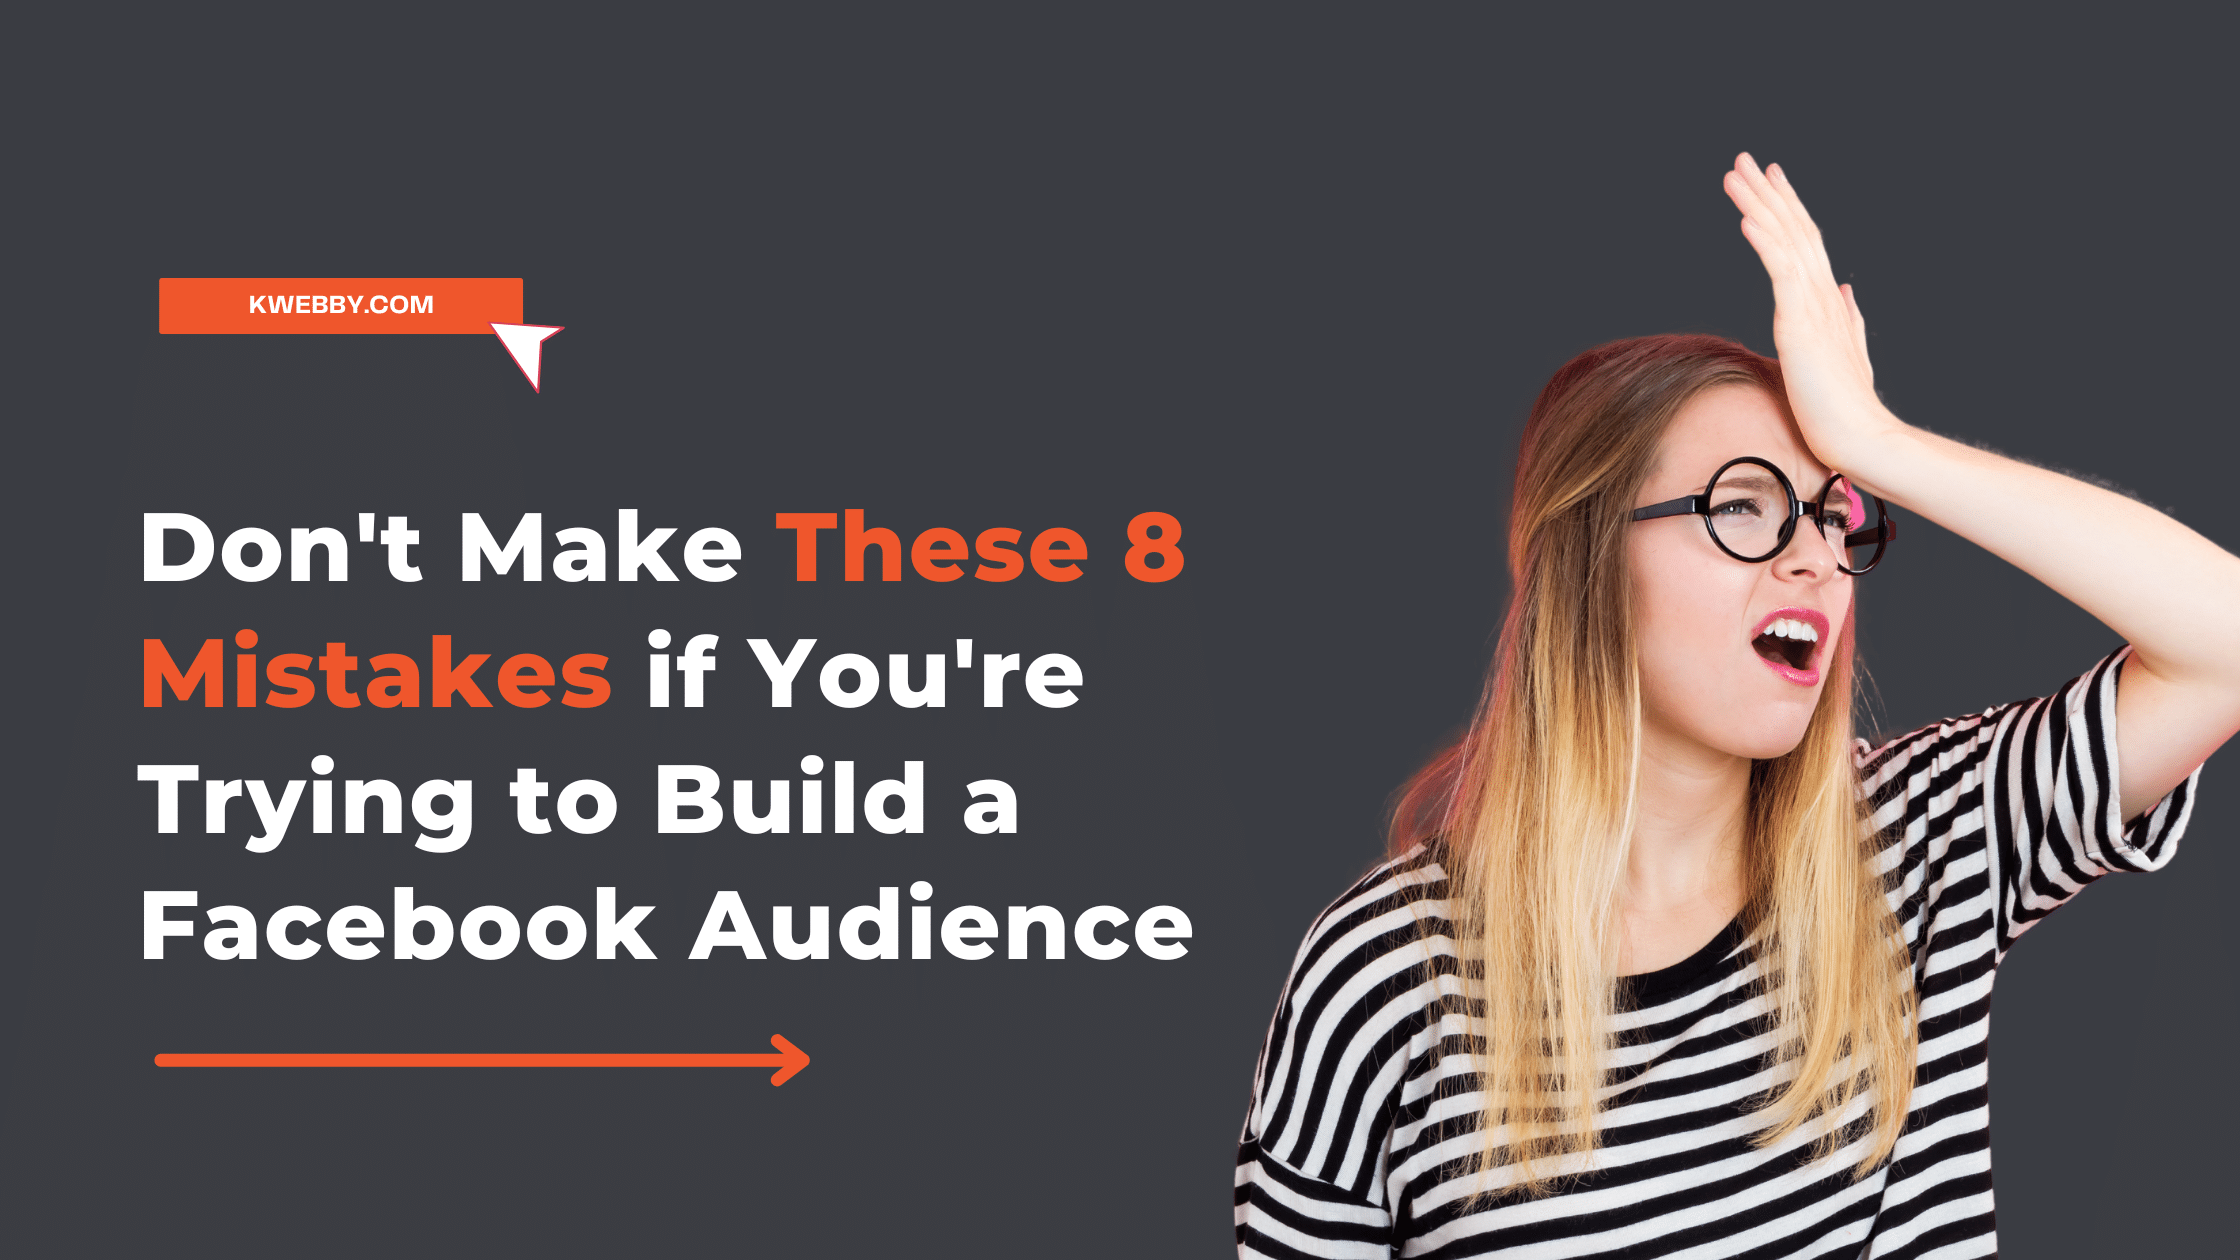 Don’t Make These 8 Mistakes if You’re Trying to Build a Facebook Audience